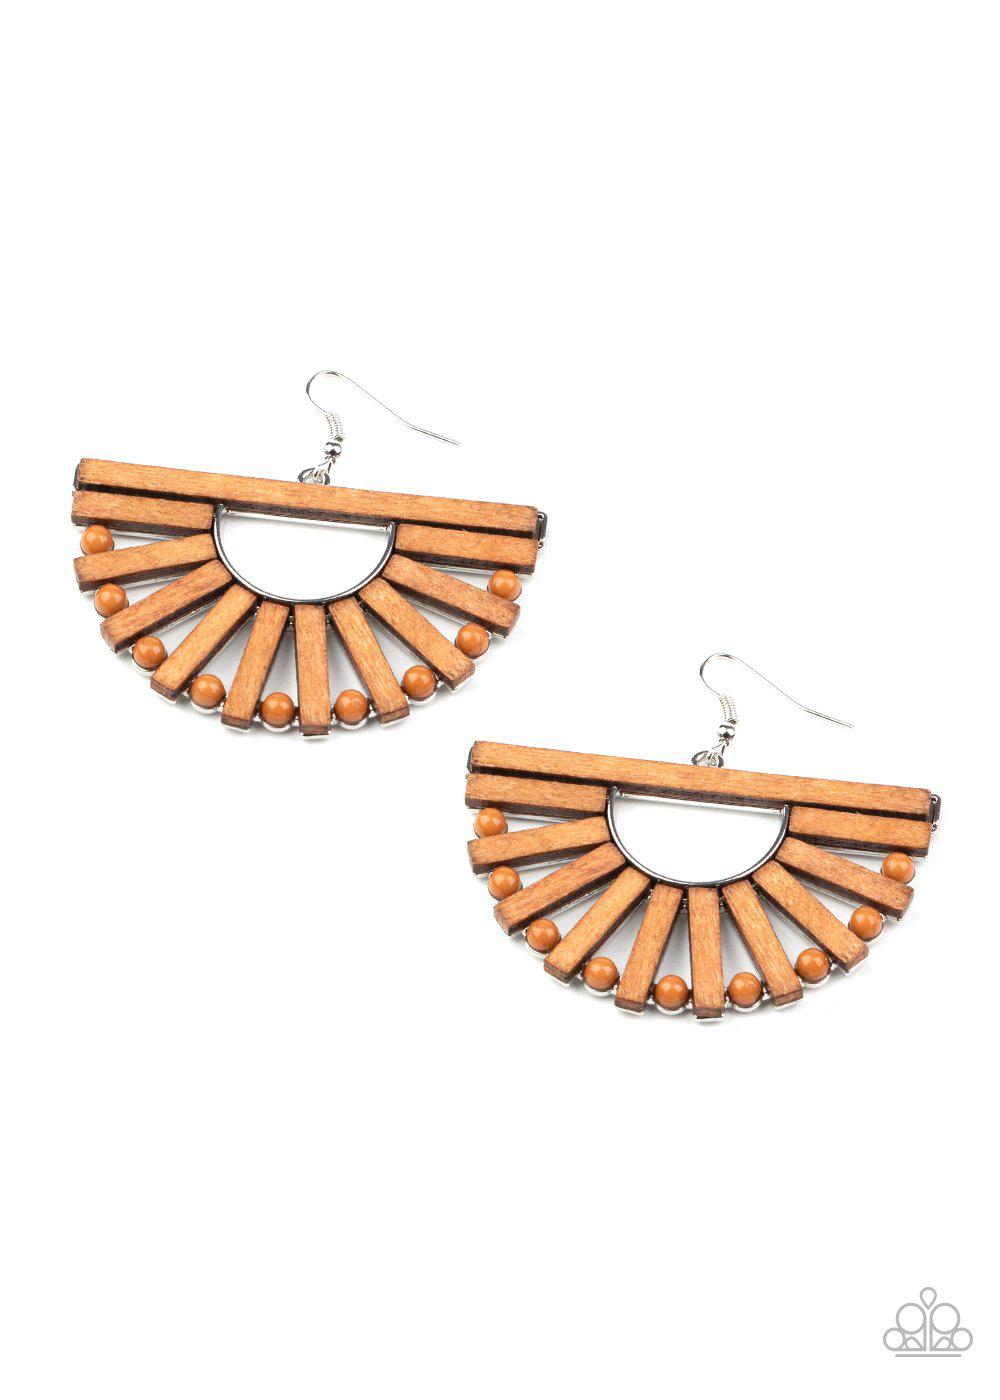 Wooden Wonderland Brown Wood Earrings - Paparazzi Accessories - lightbox -CarasShop.com - $5 Jewelry by Cara Jewels